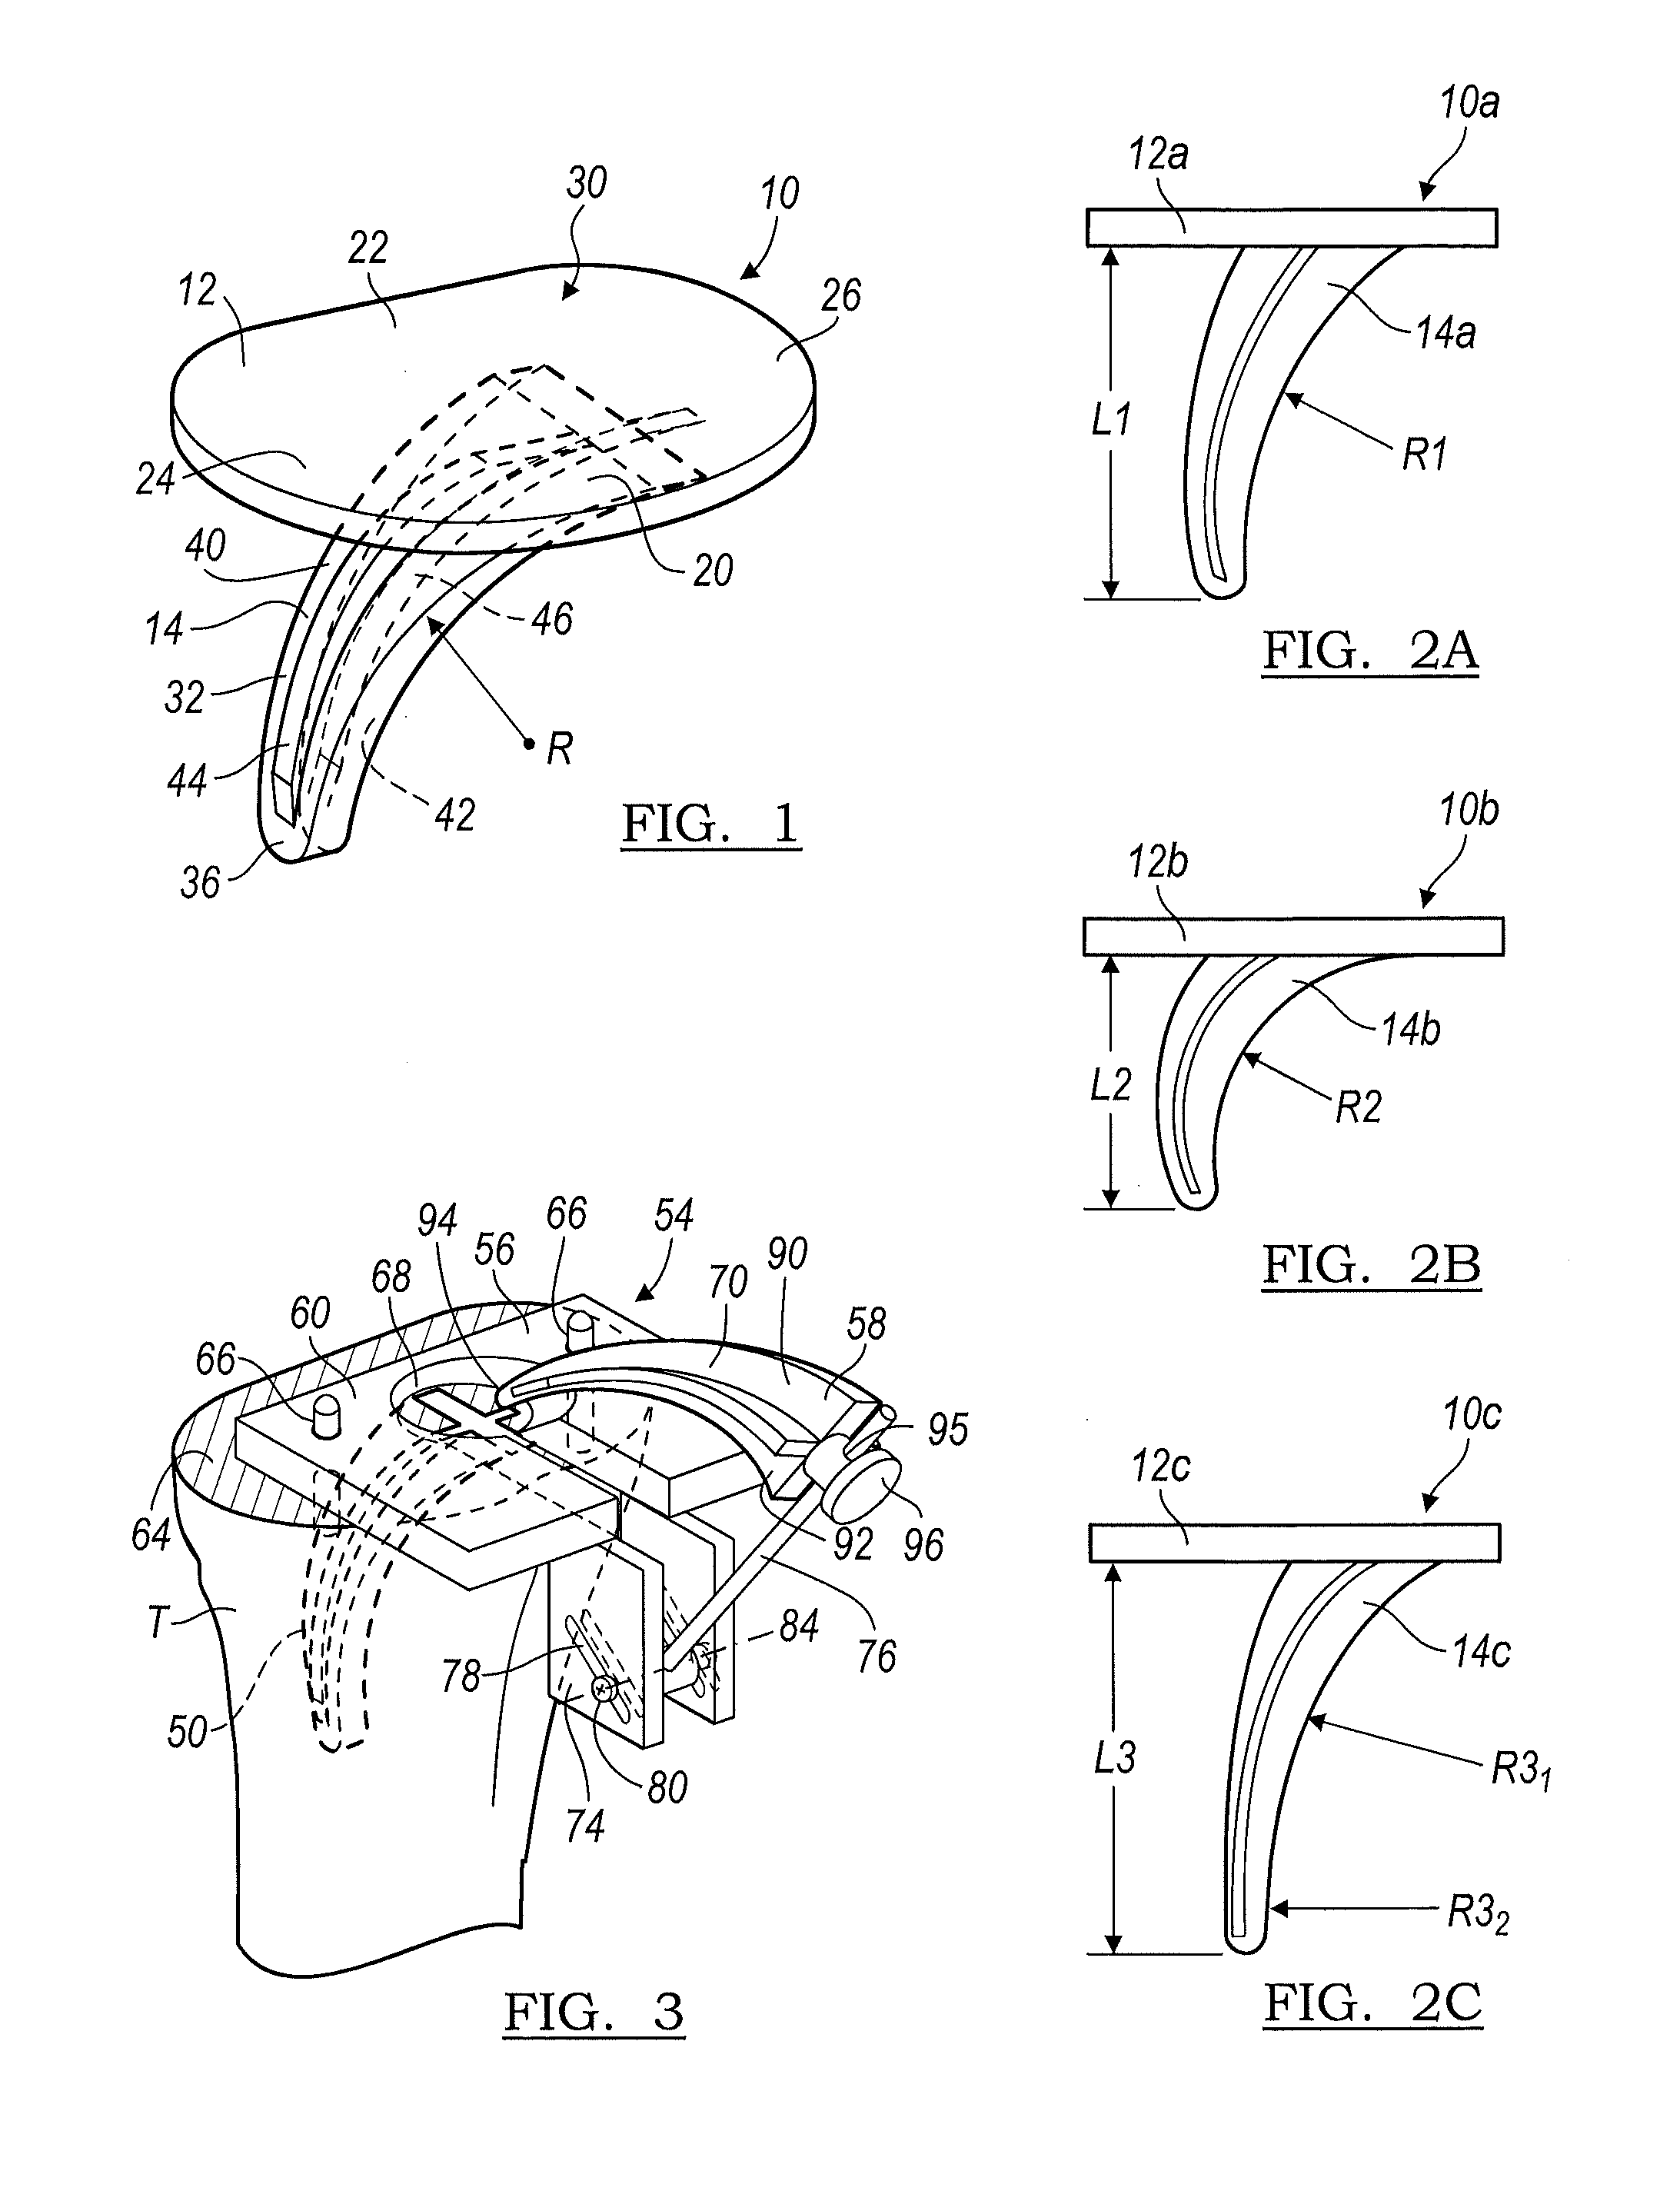 Instrumentation And Method For Implanting A Curved Stem Tibial Tray